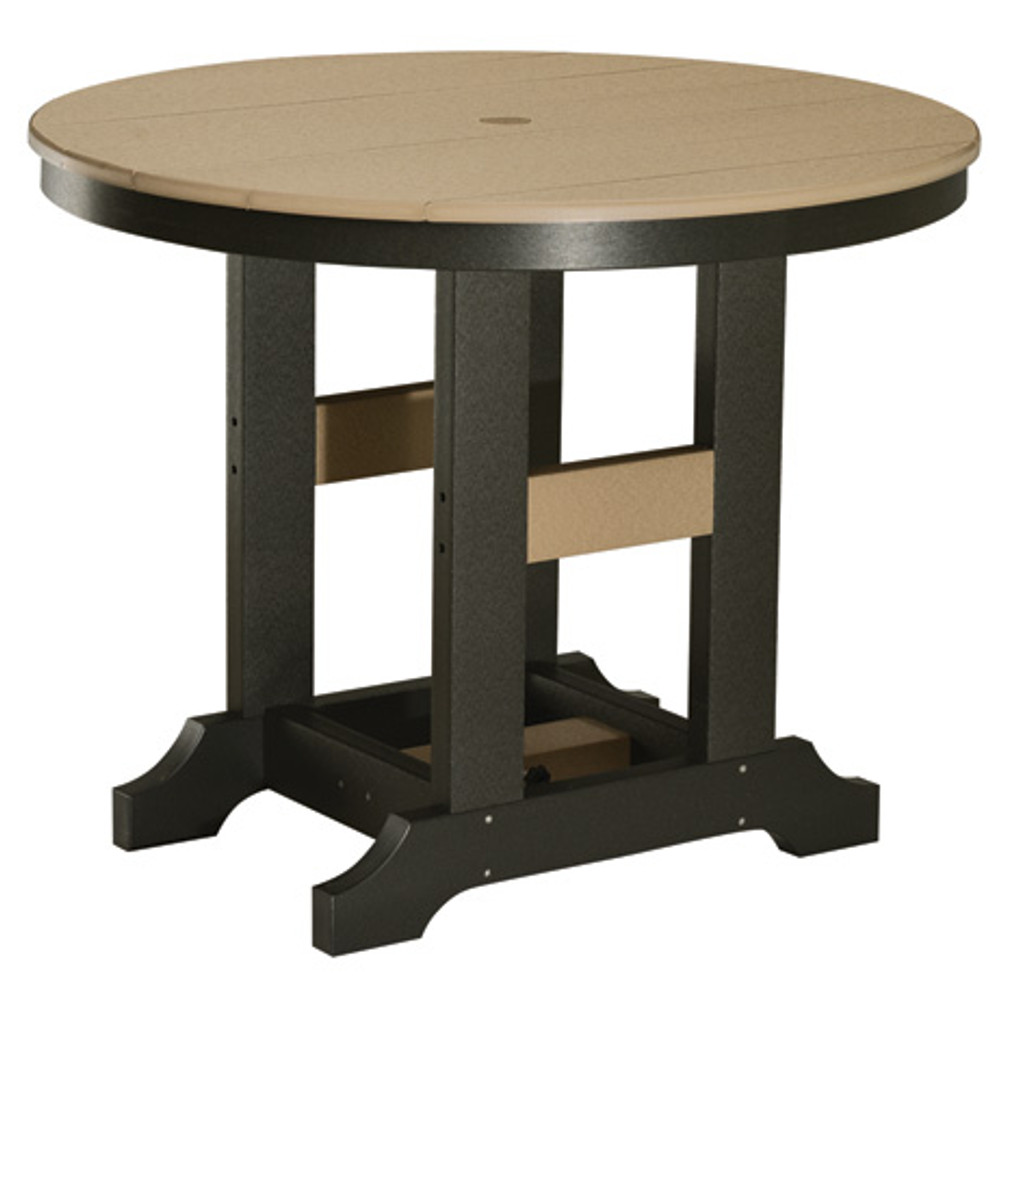 38" ROUND TABLE